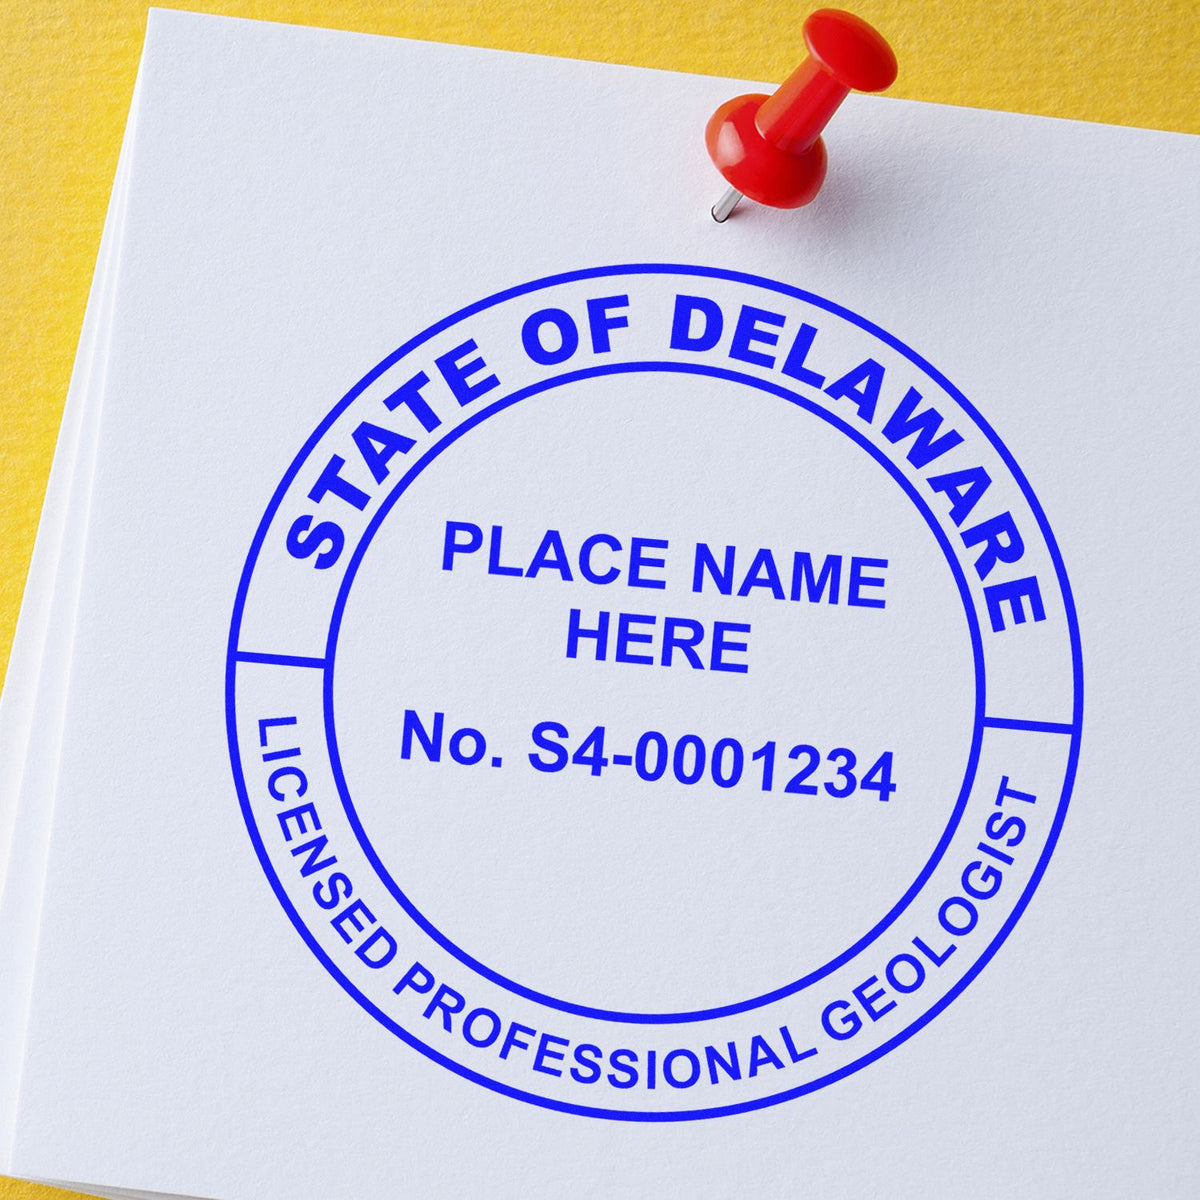 An alternative view of the Digital Delaware Geologist Stamp, Electronic Seal for Delaware Geologist stamped on a sheet of paper showing the image in use